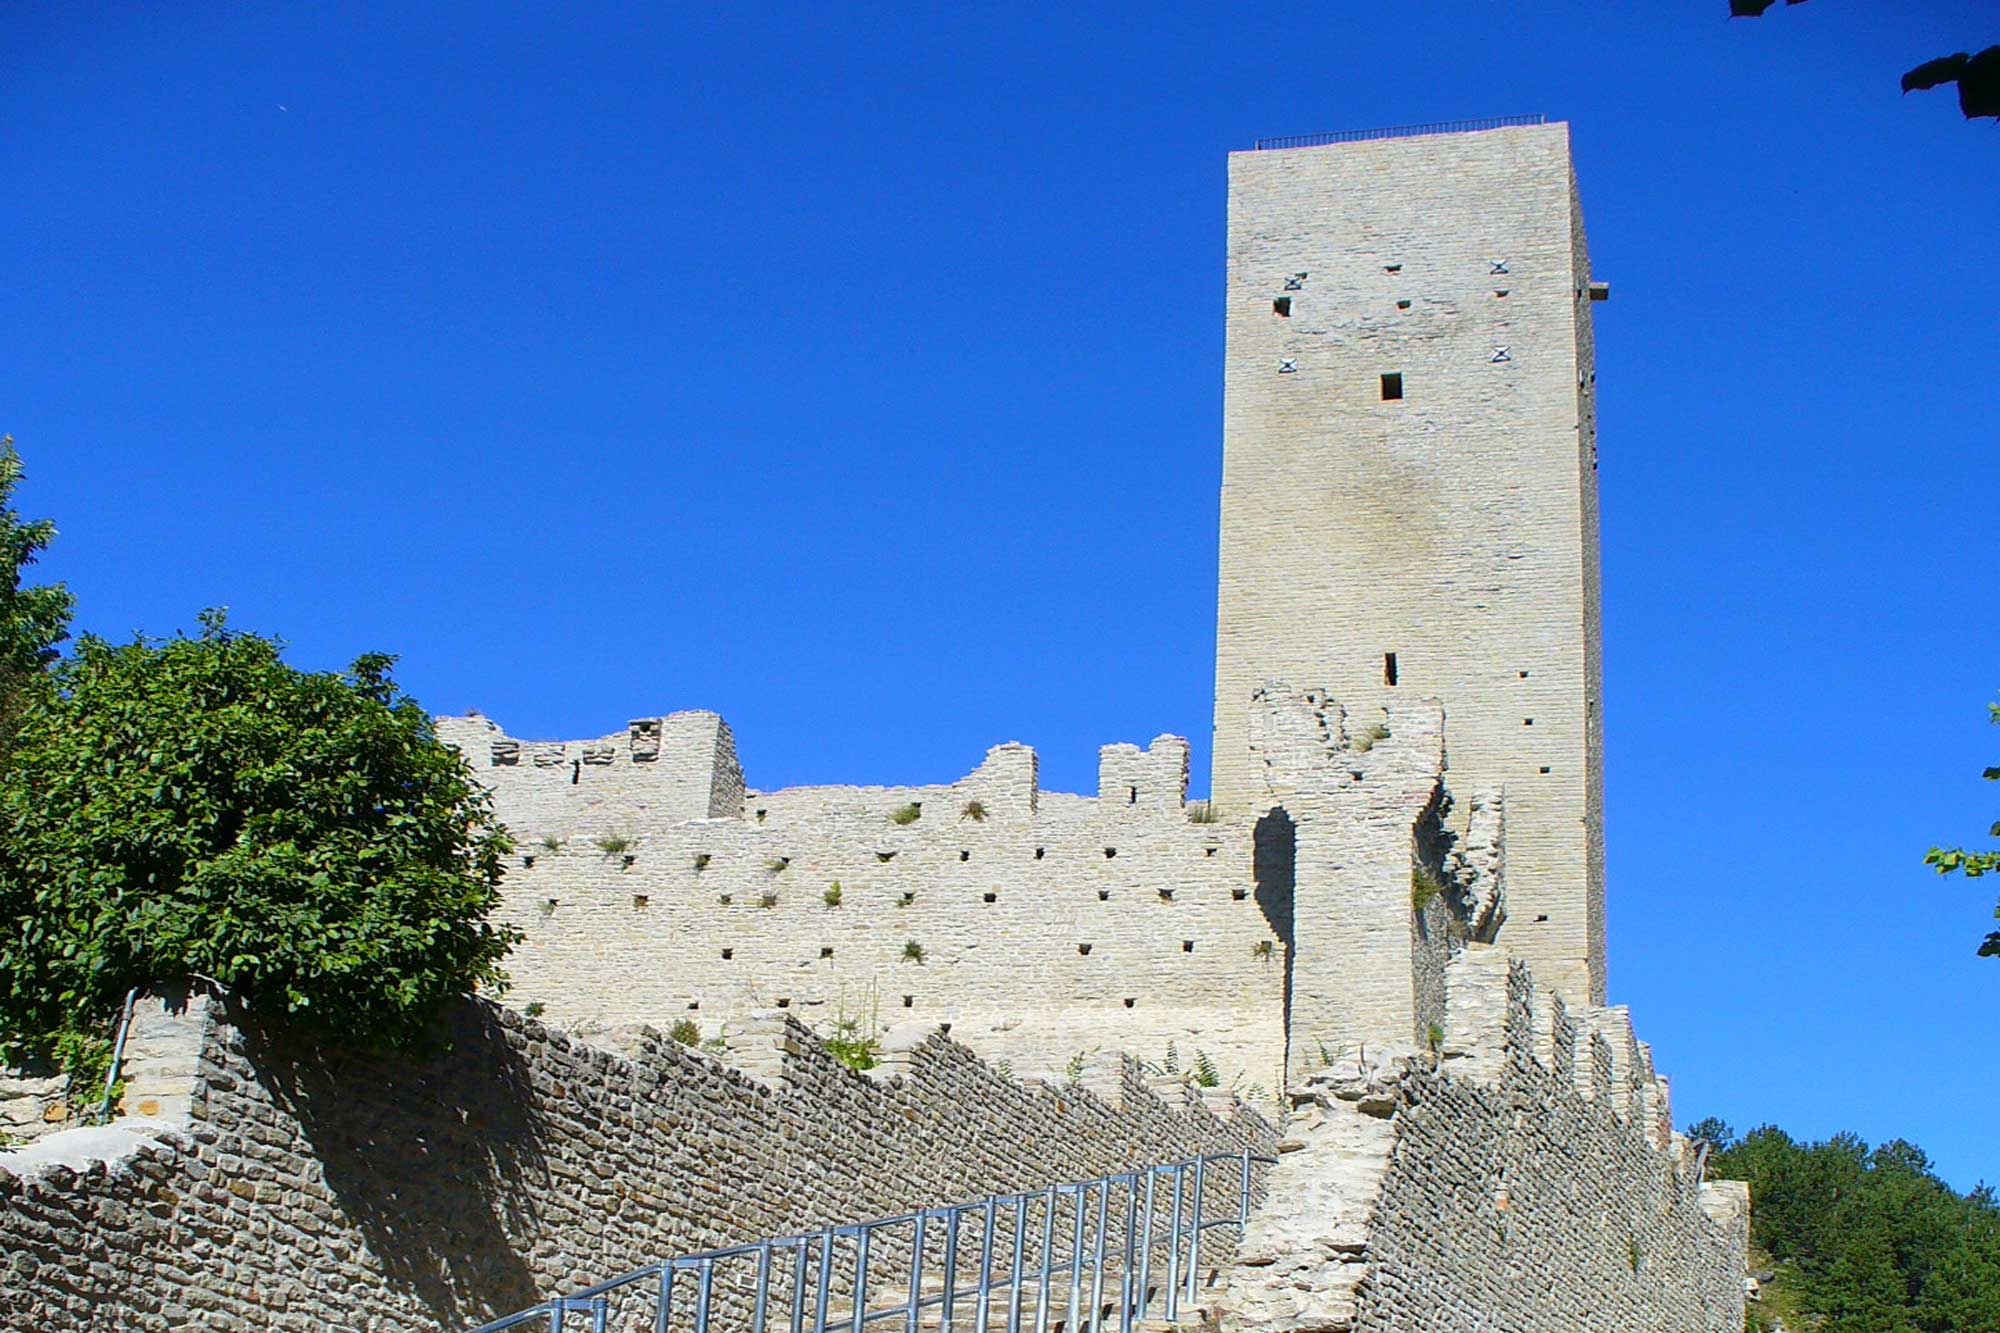 The Fortress of Acquaviva Picena with your dog